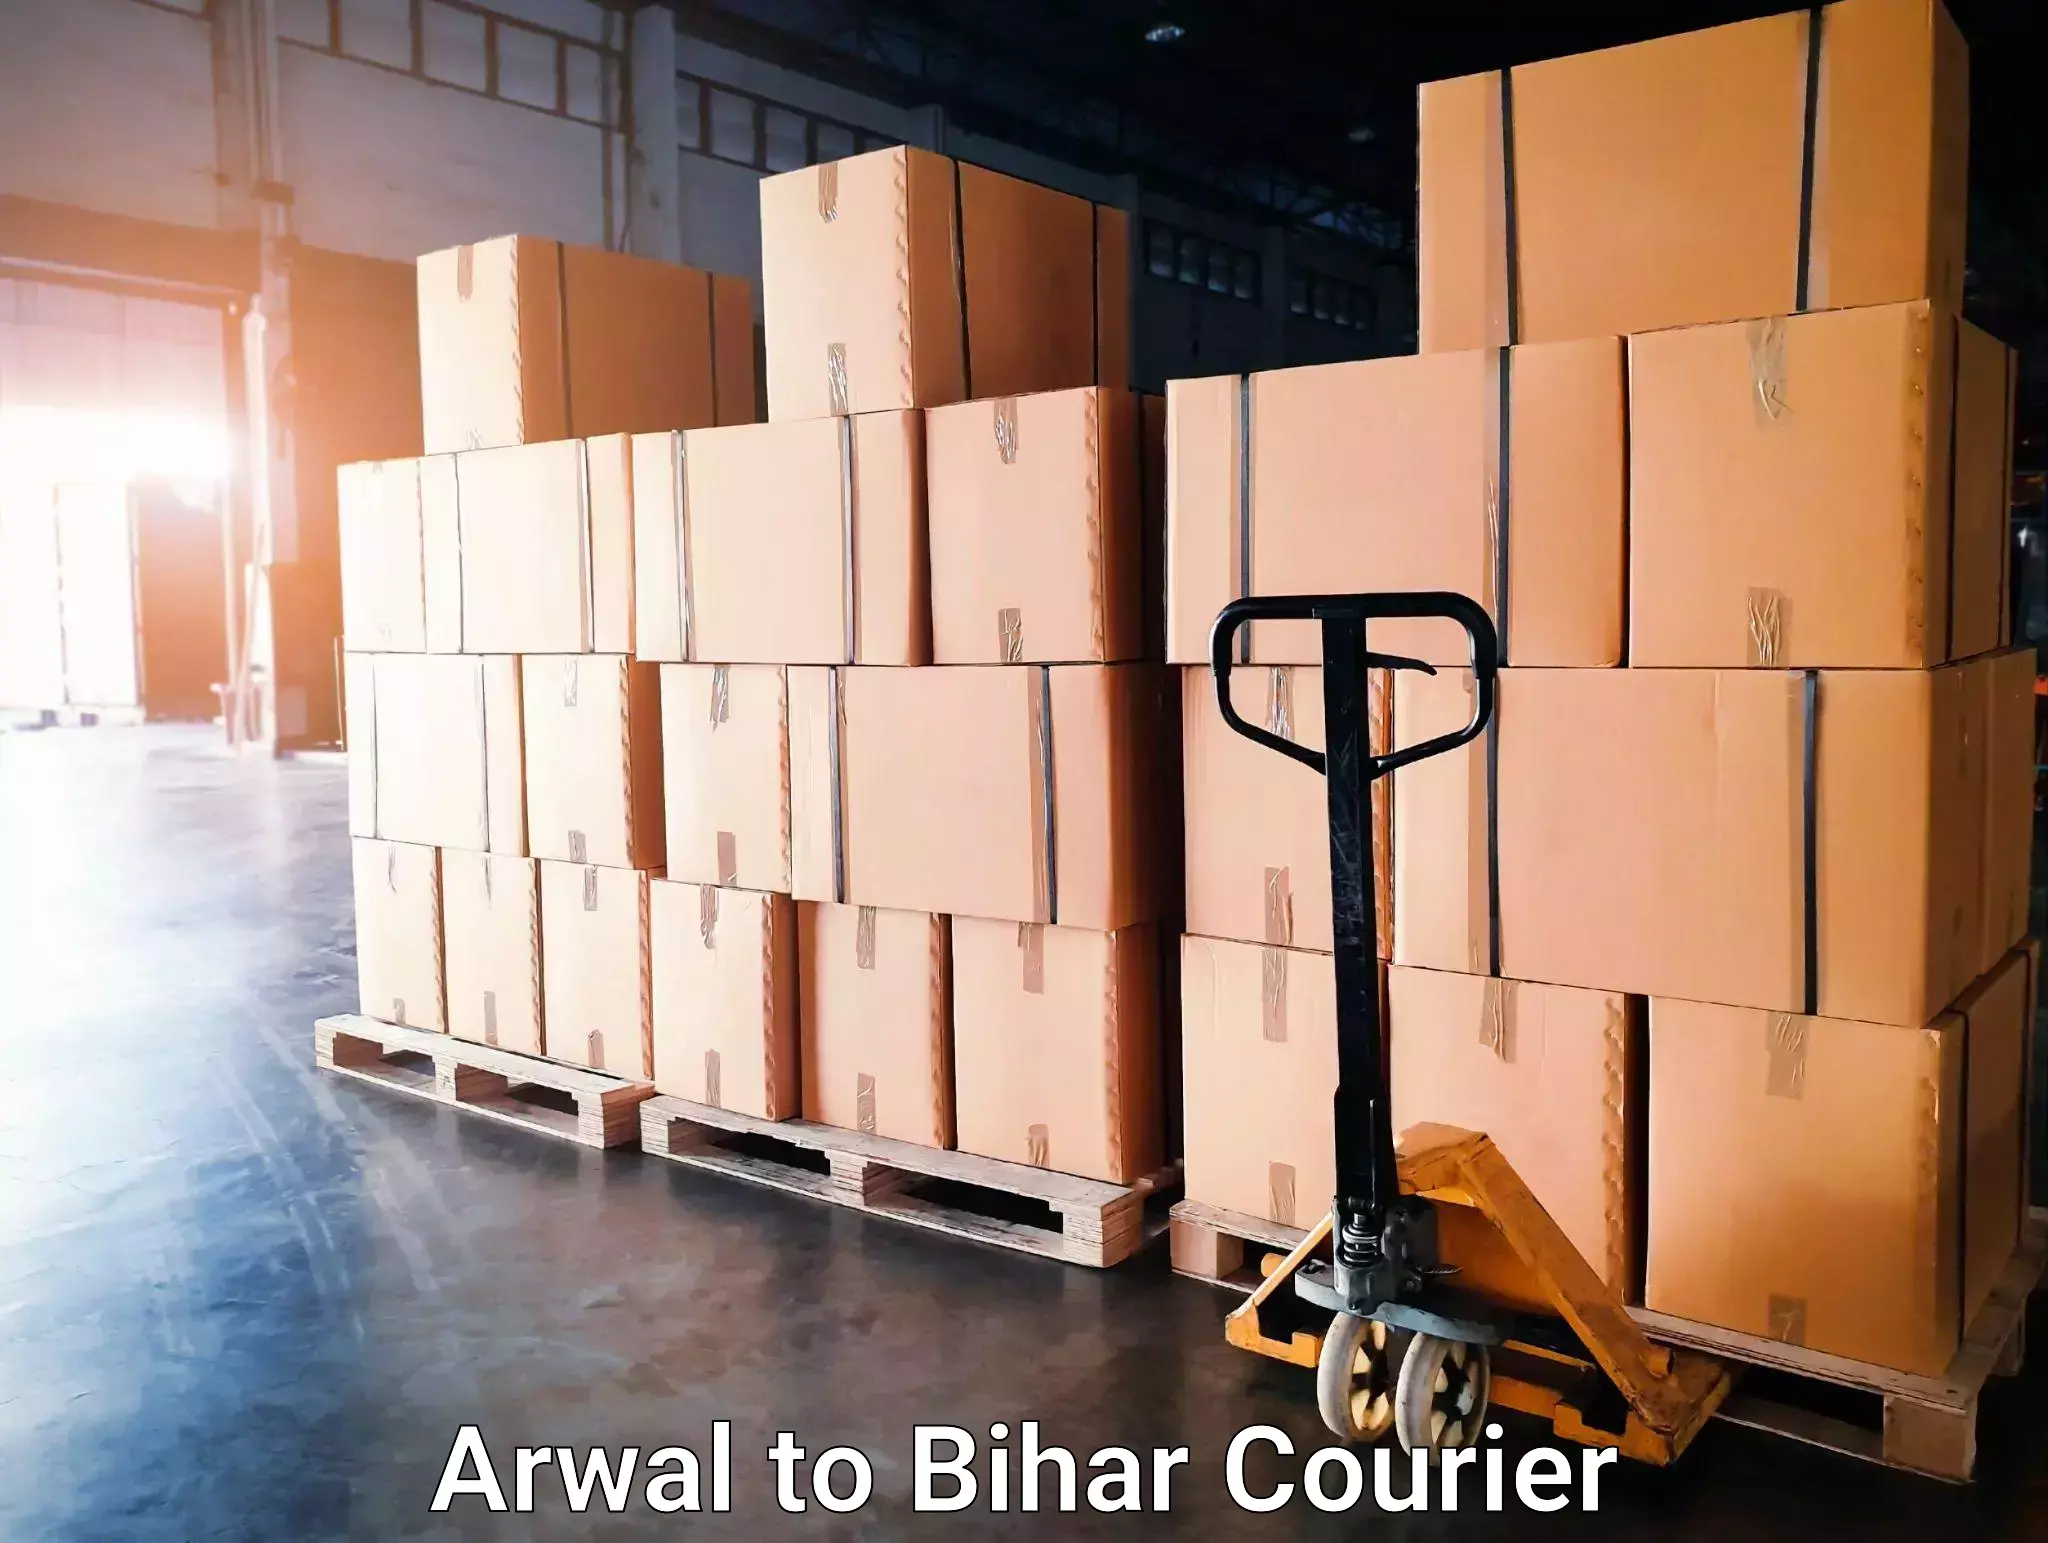 Hassle-free relocation Arwal to Bihar